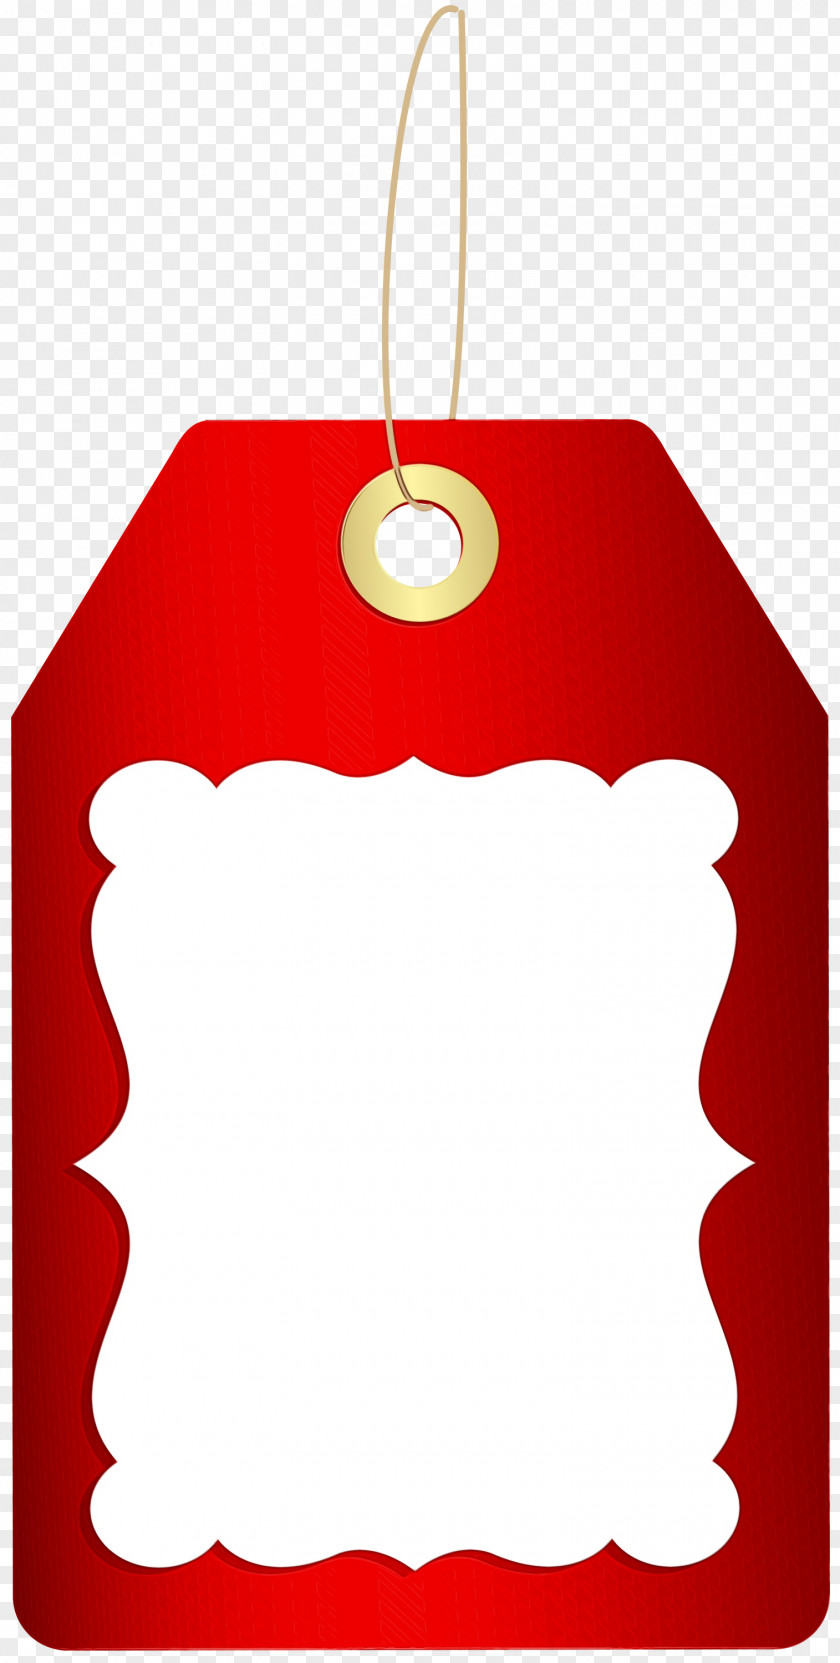 Rectangle Christmas Ornament Graphic Design Icon PNG